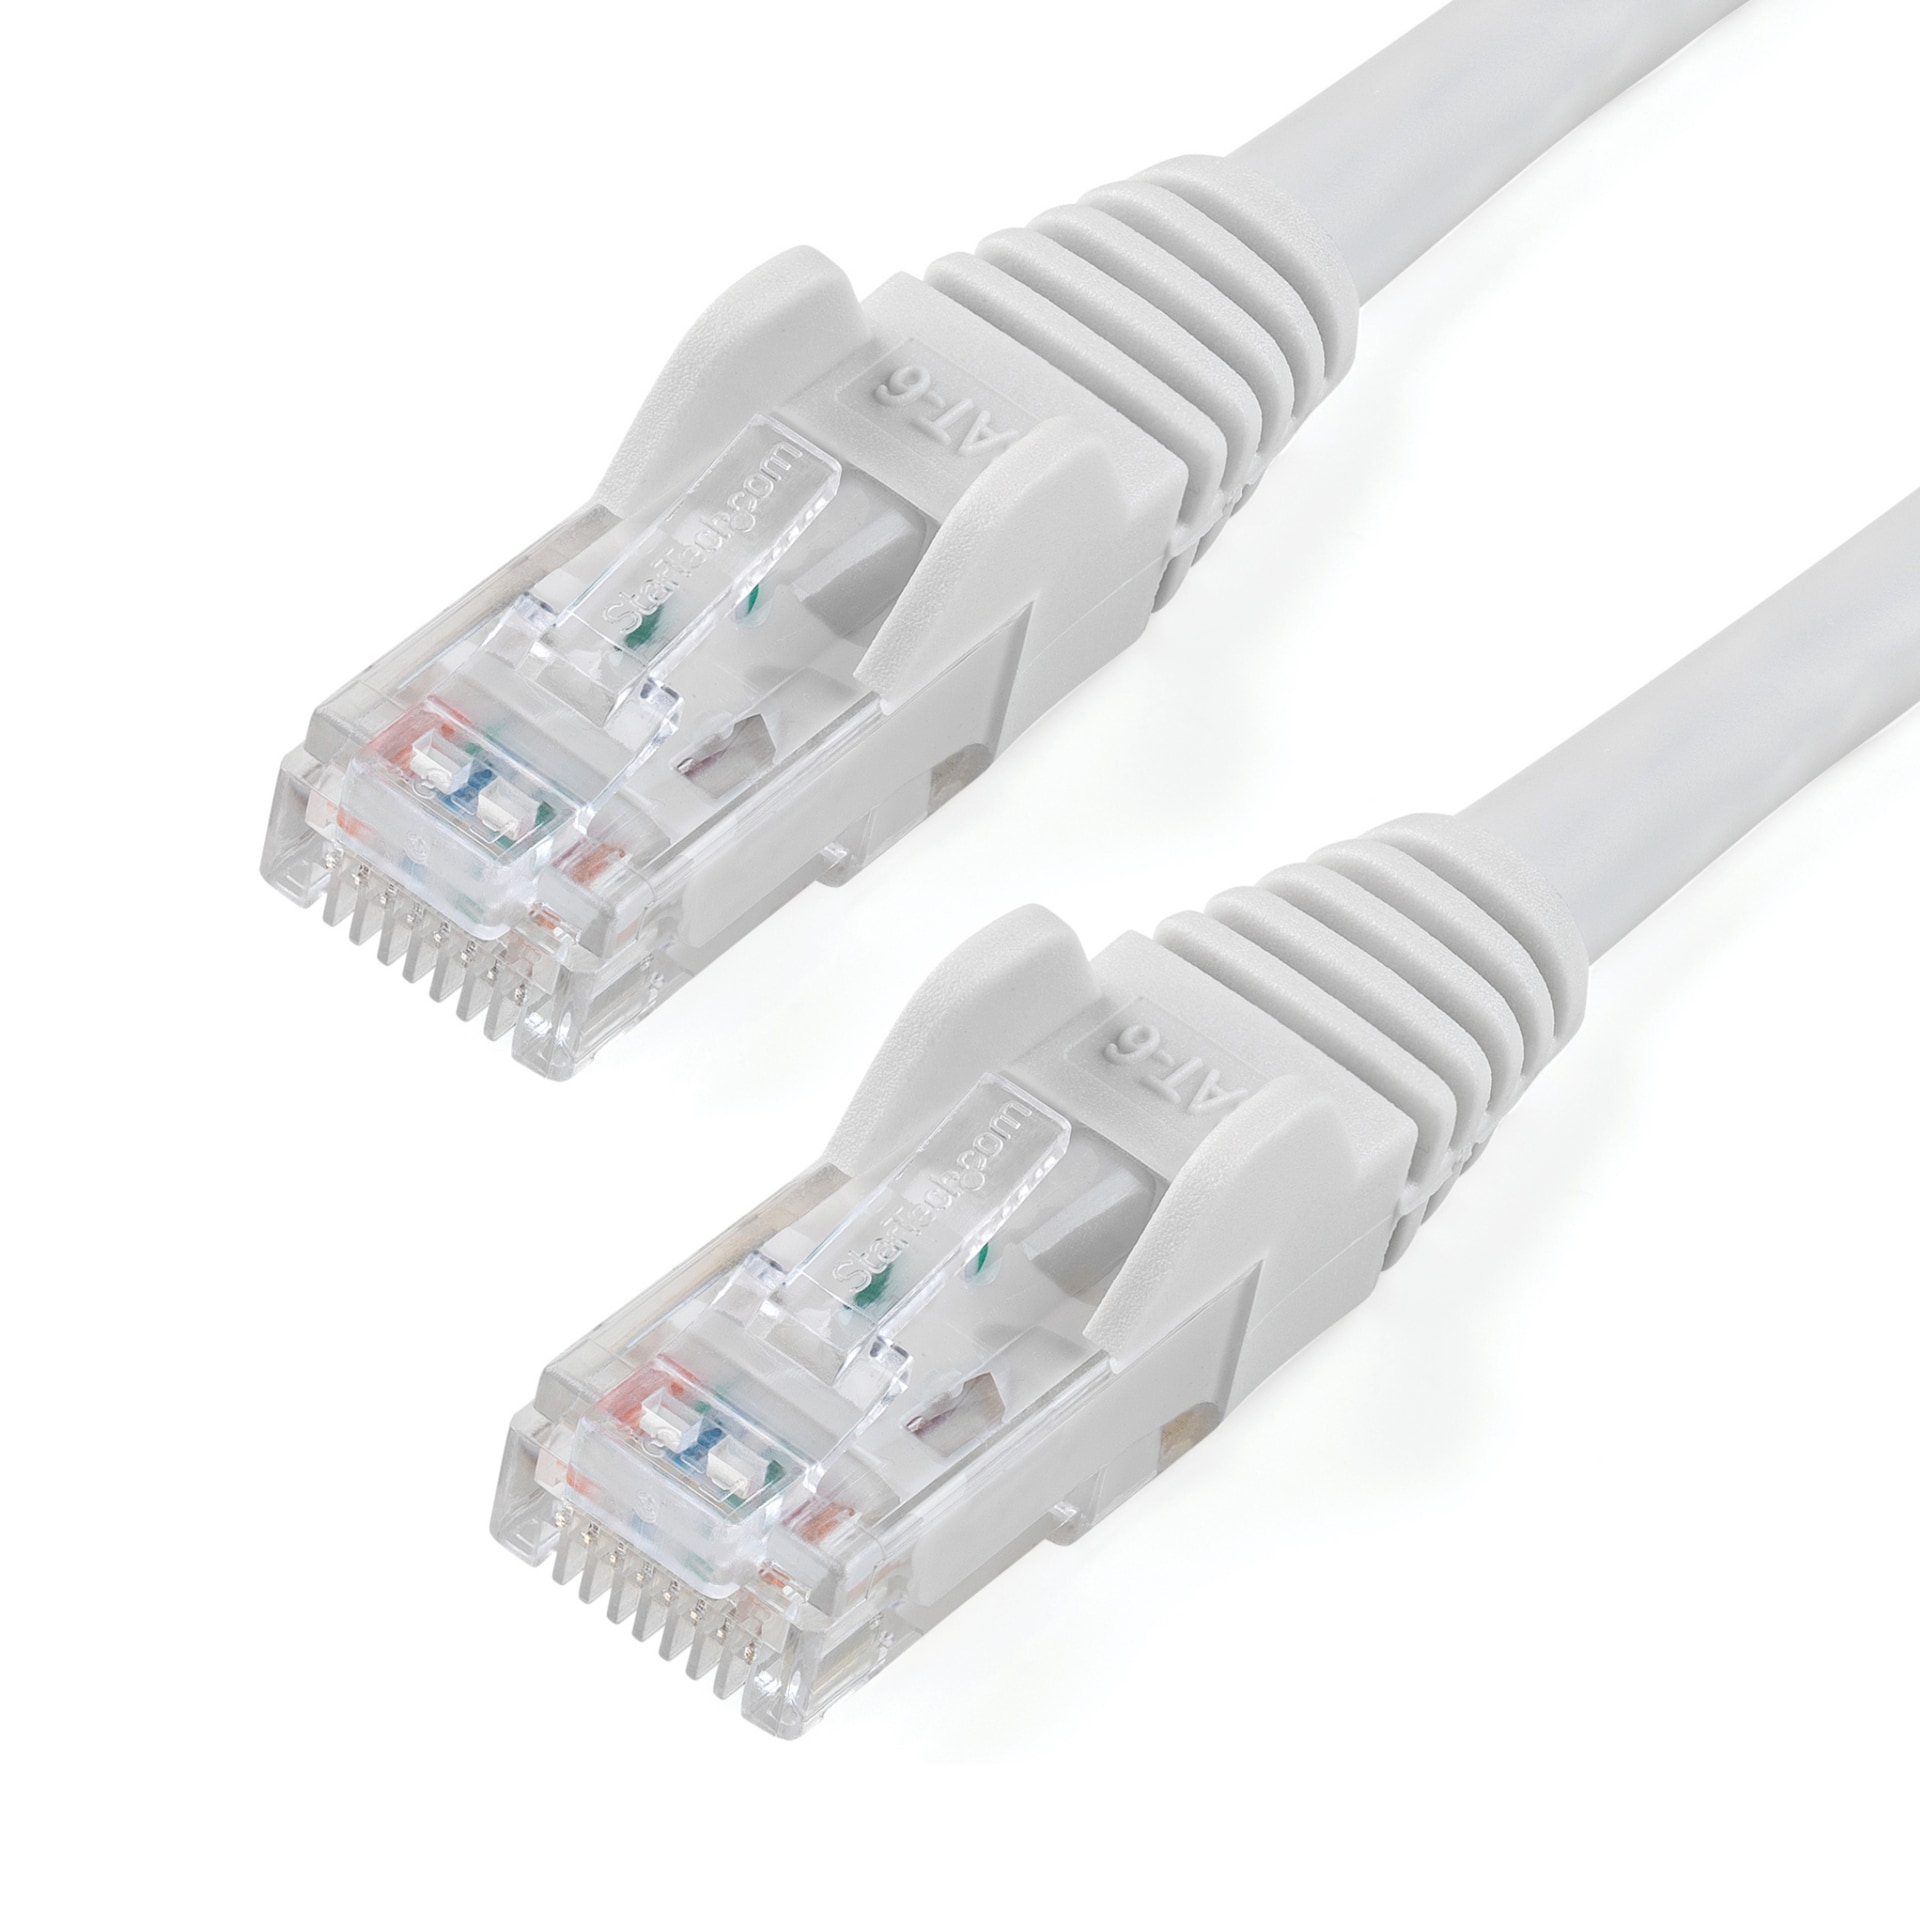 StarTech.com CAT6 Ethernet Cable 75' White 650MHz PoE Snagless Patch Cord